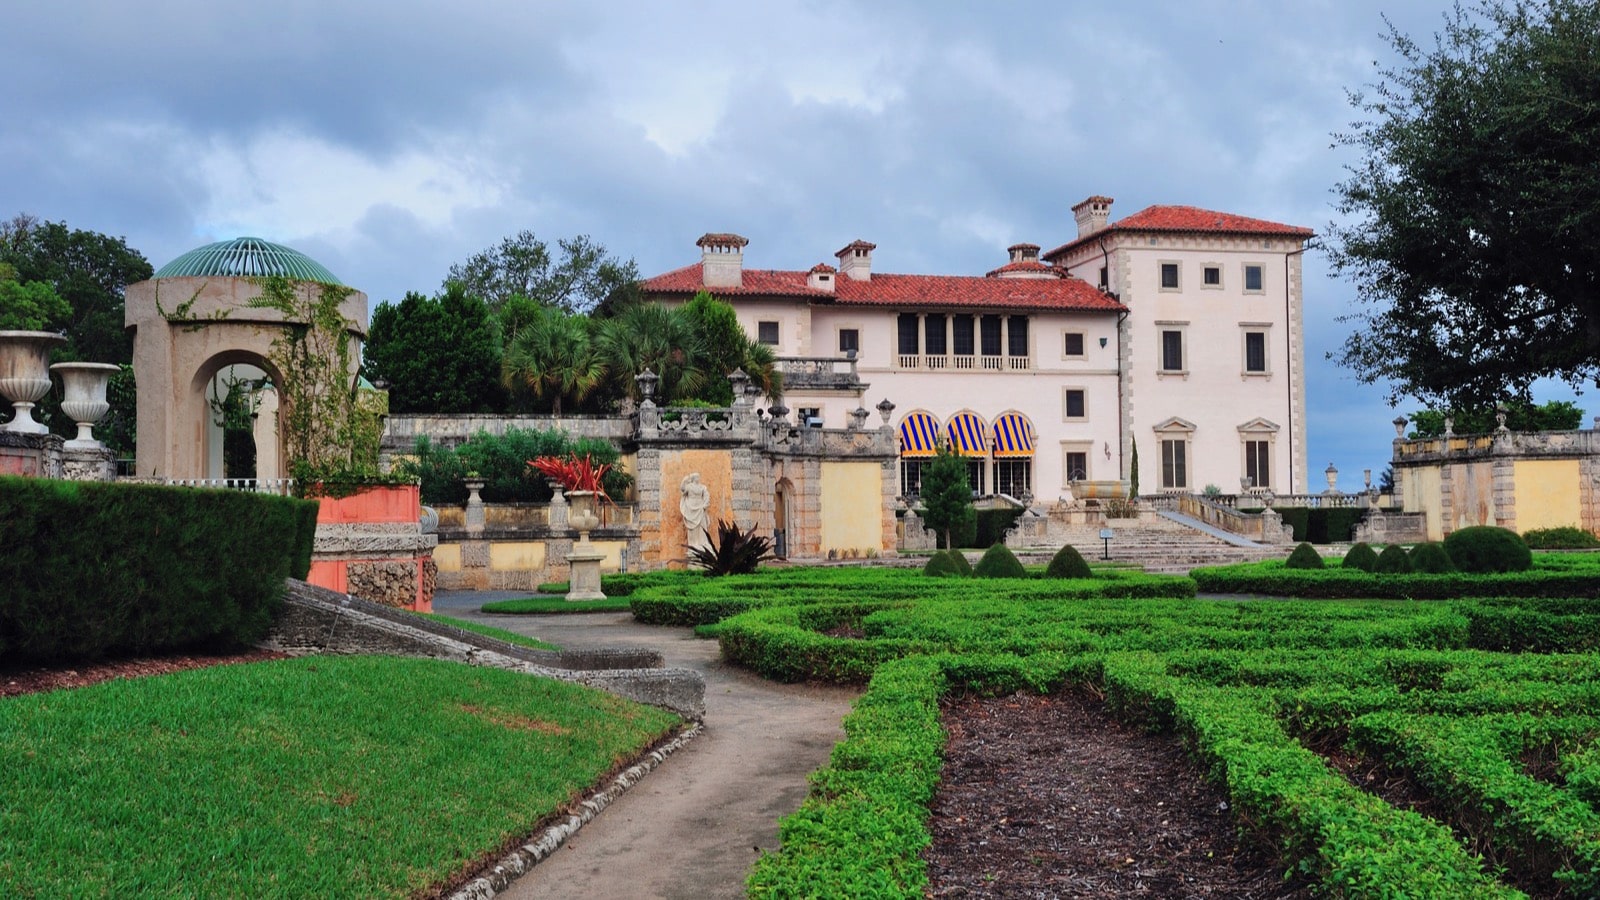 <p>A designated National Historic Landmark, the Vizcaya Museum and Gardens attracts hundreds of thousands of visitors annually.</p><p>The estate was commissioned to be built by James Deering, an American executive of the Deering Harvester Company, to rival those in Europe. Its final construction includes a pavilion, swimming pool, a cottage, and gardens with a reflecting pool and fountain, while historic art, furniture, and antiques decorate the estate's interior.</p>